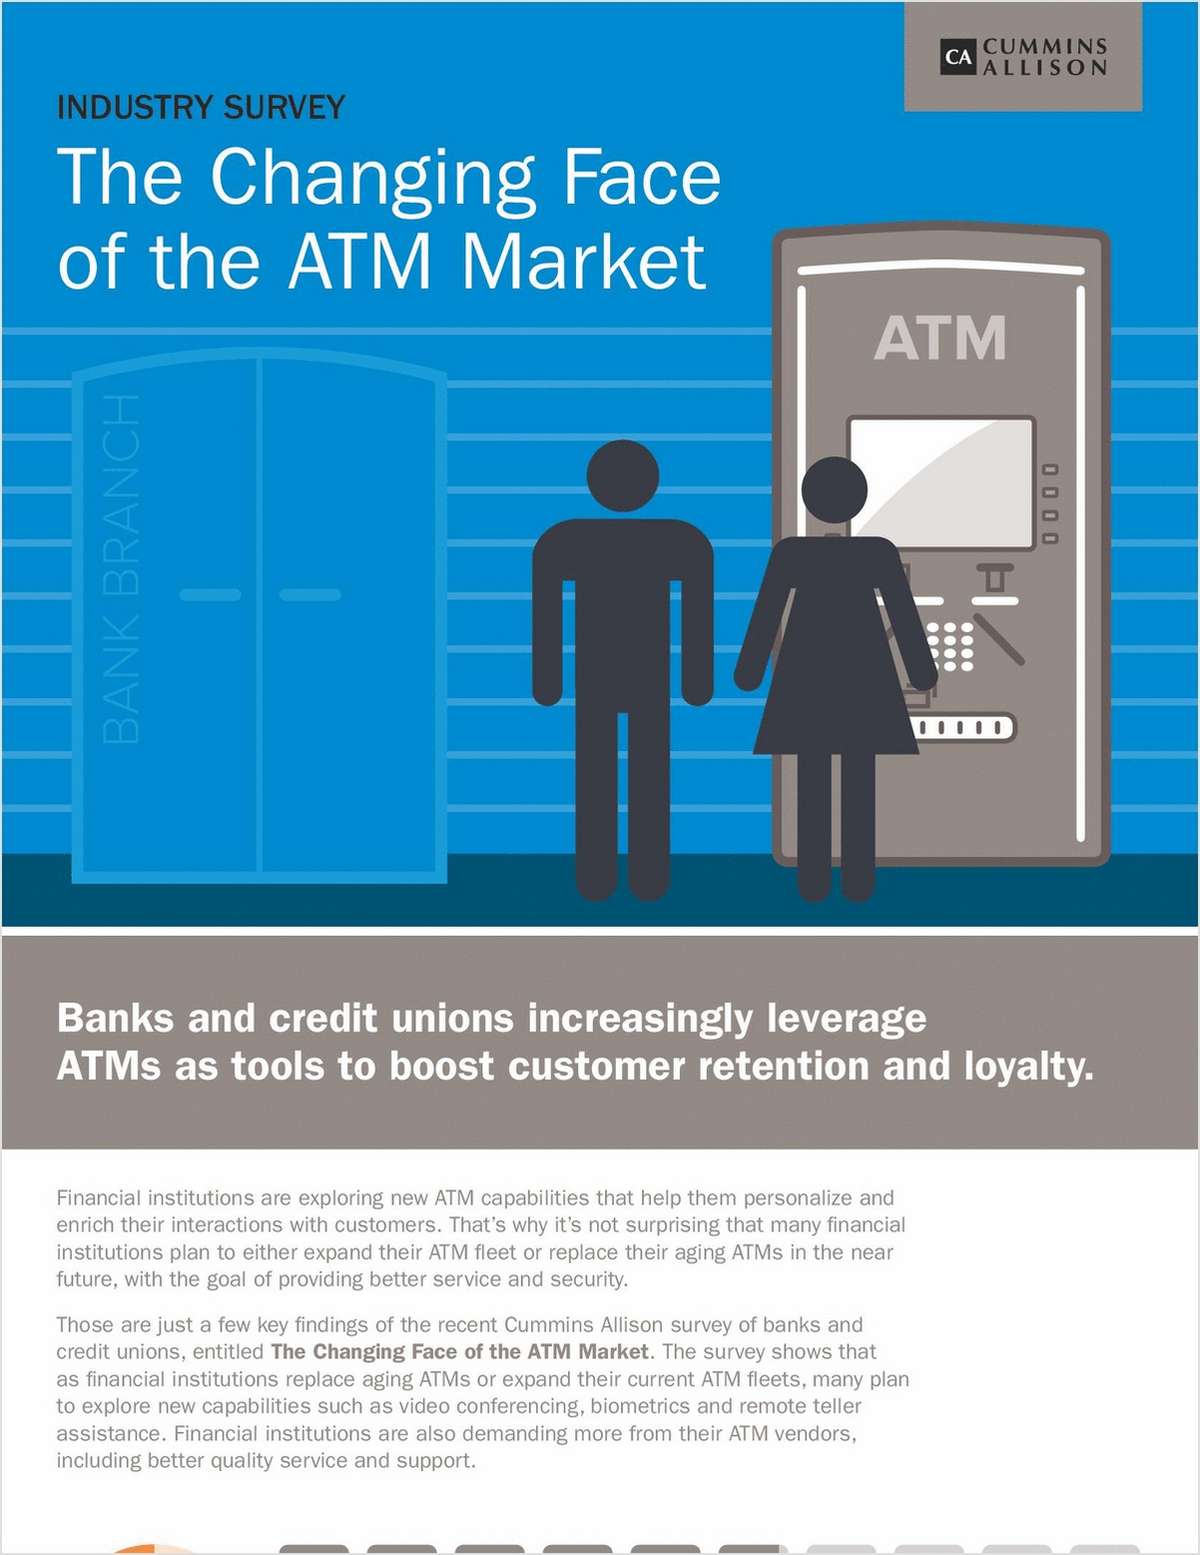 The Changing Face of the ATM Market